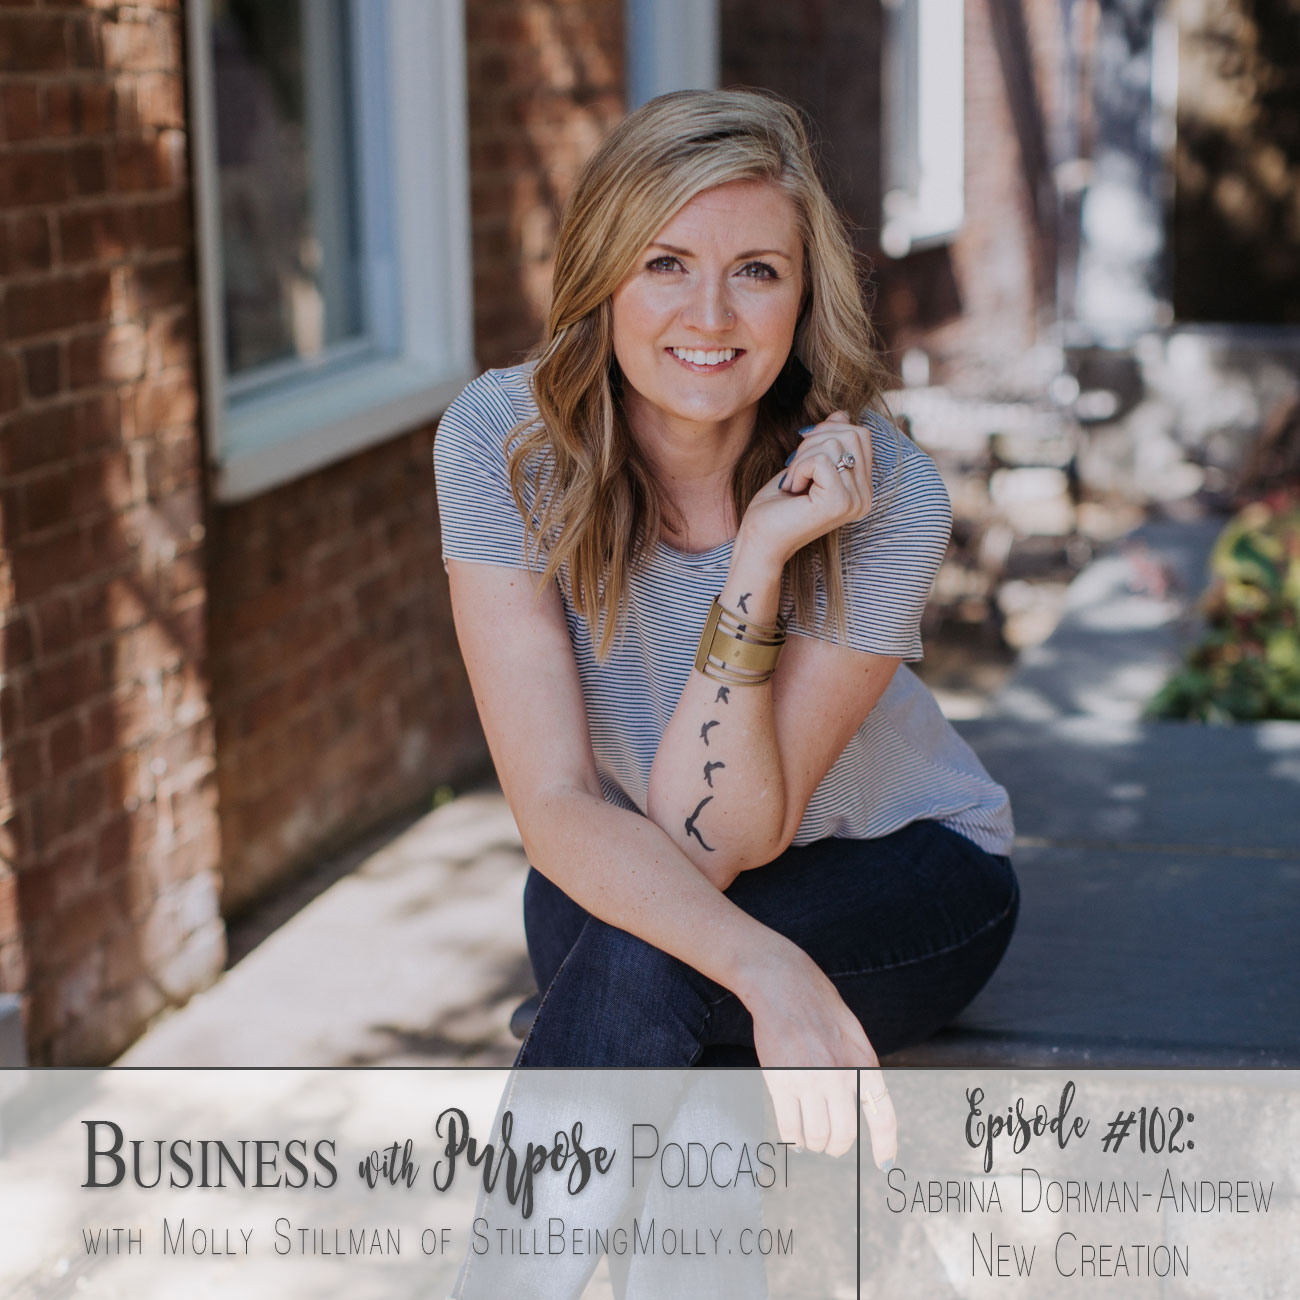 Business with Purpose Podcast EP 102: Sabrina Dorman-Andrew, New Creation